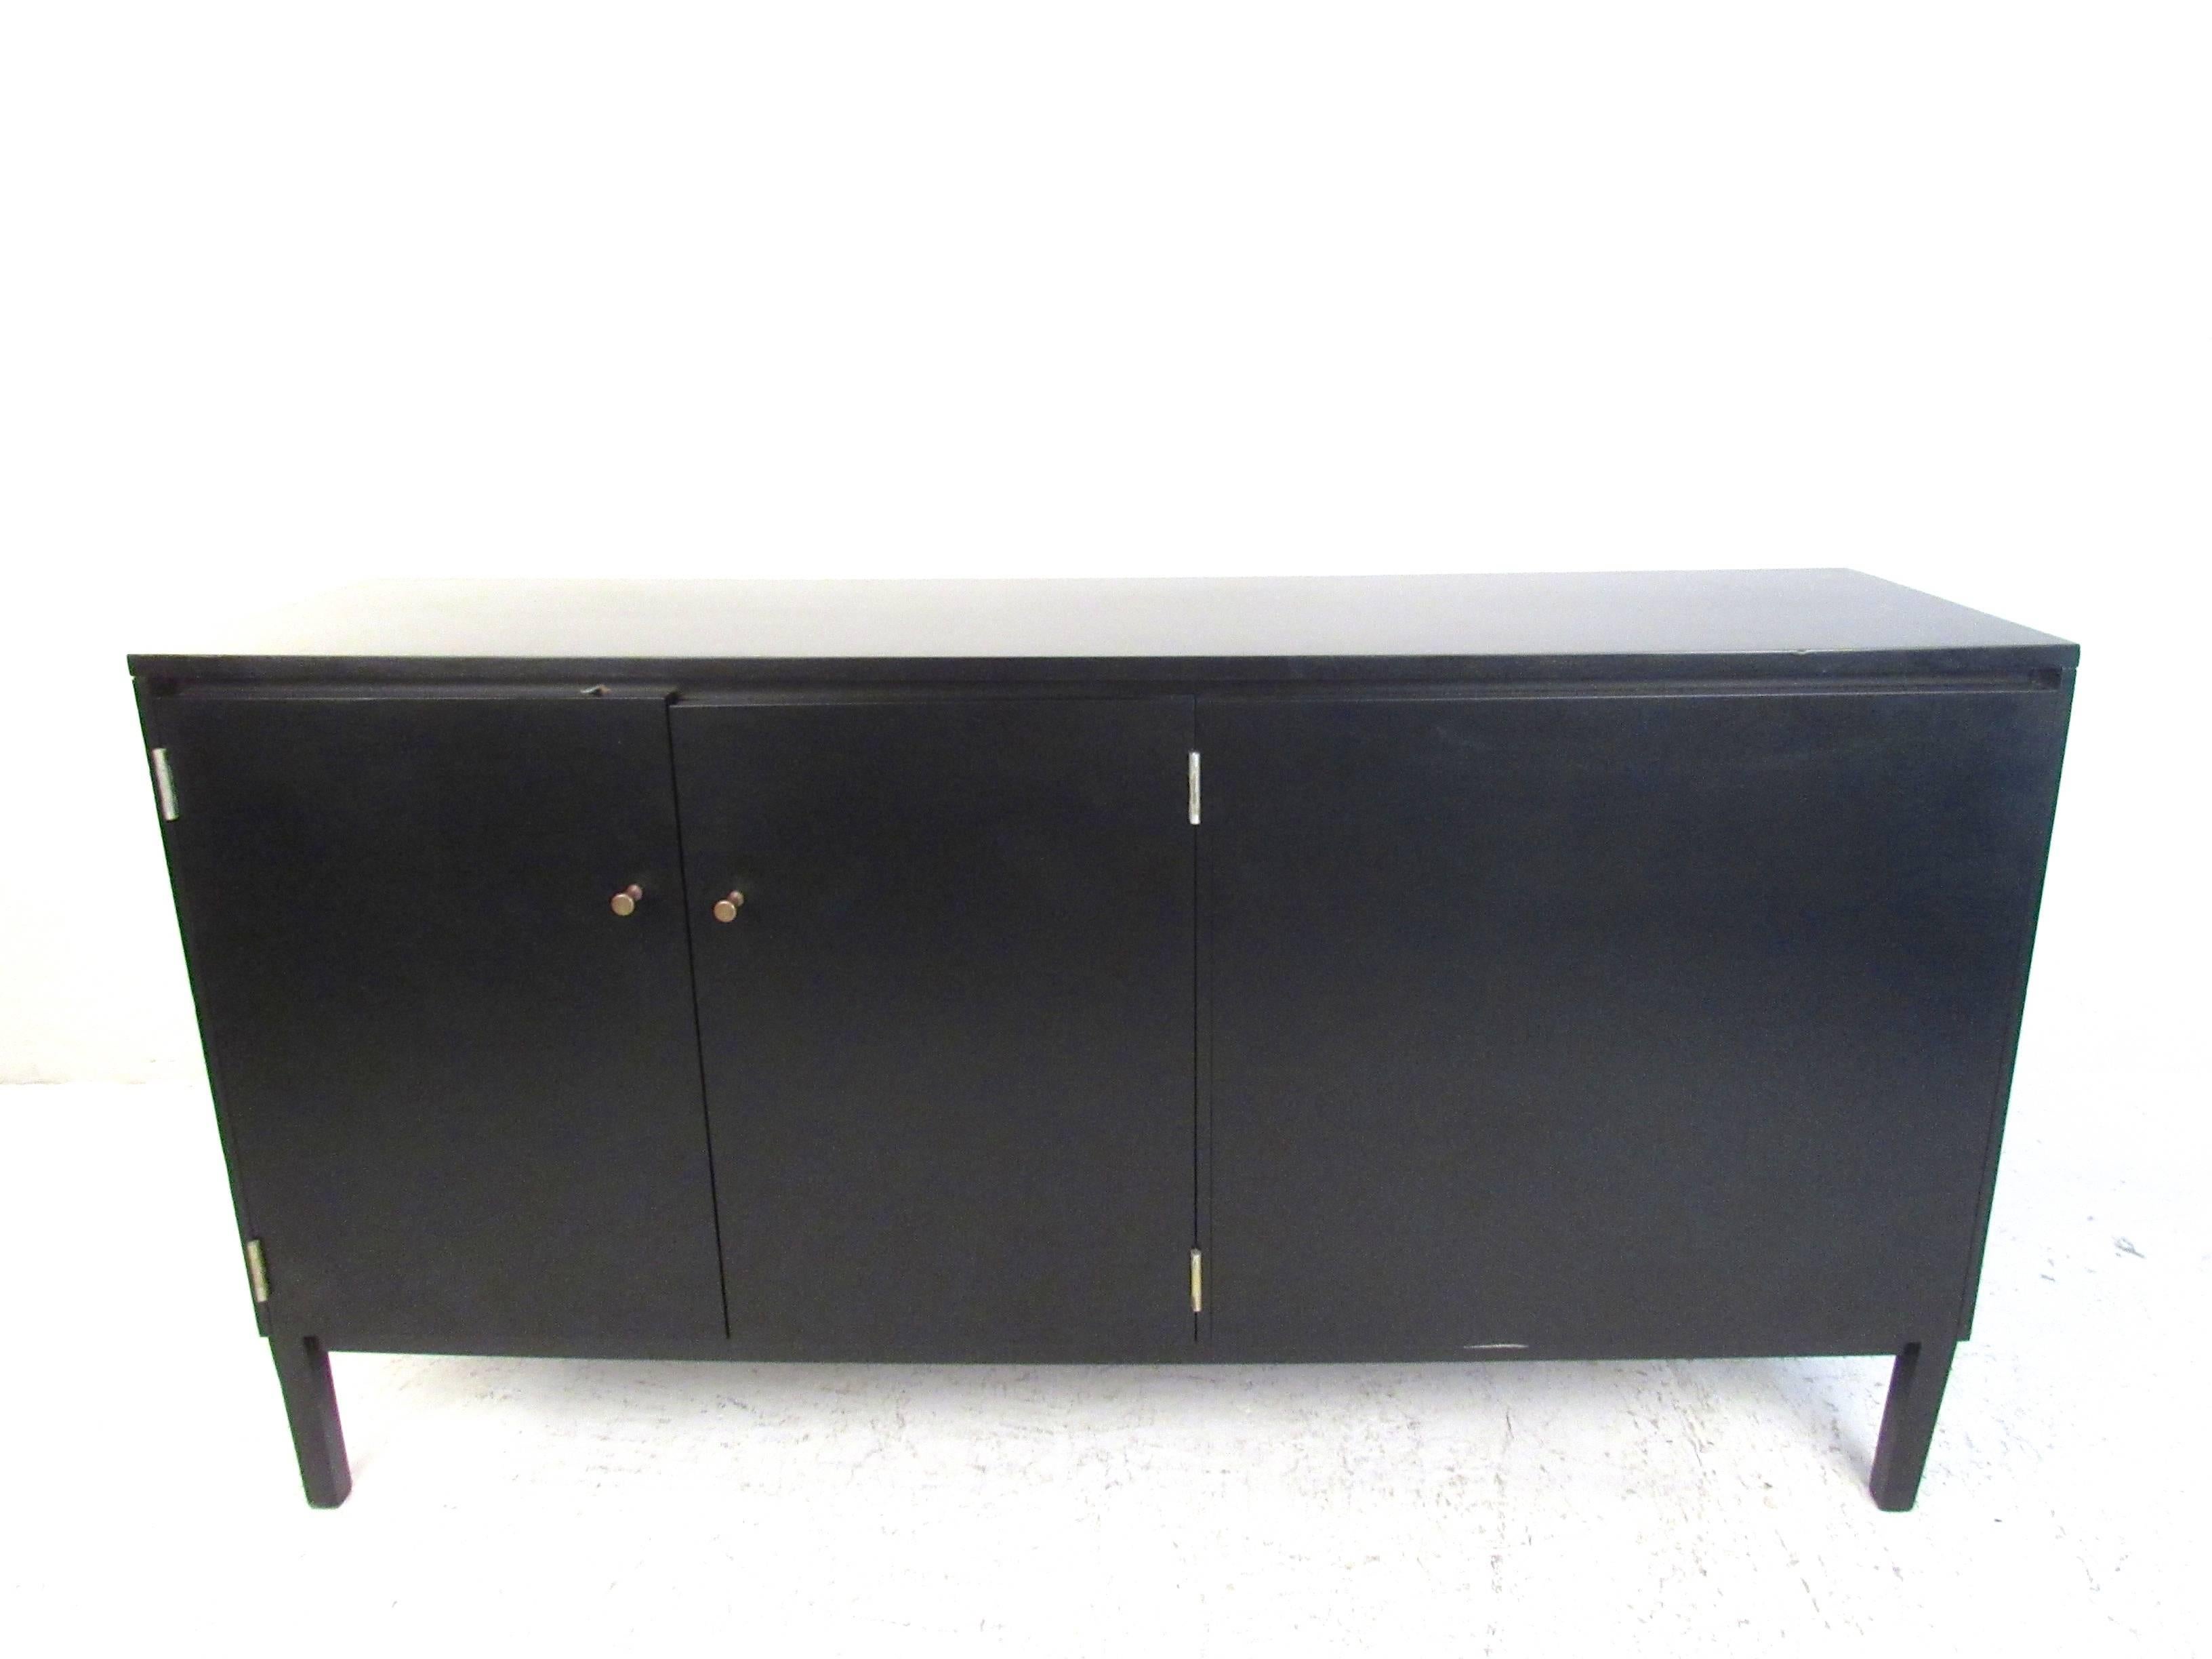 This vintage Paul McCobb Perimeter Group credenza features double-sided cabinets, drawers for storage, and unique ebonized finish. Classic McCobb drawer pulls add to it's unique Mid-Century appeal. Perfect piece as an office room divider with